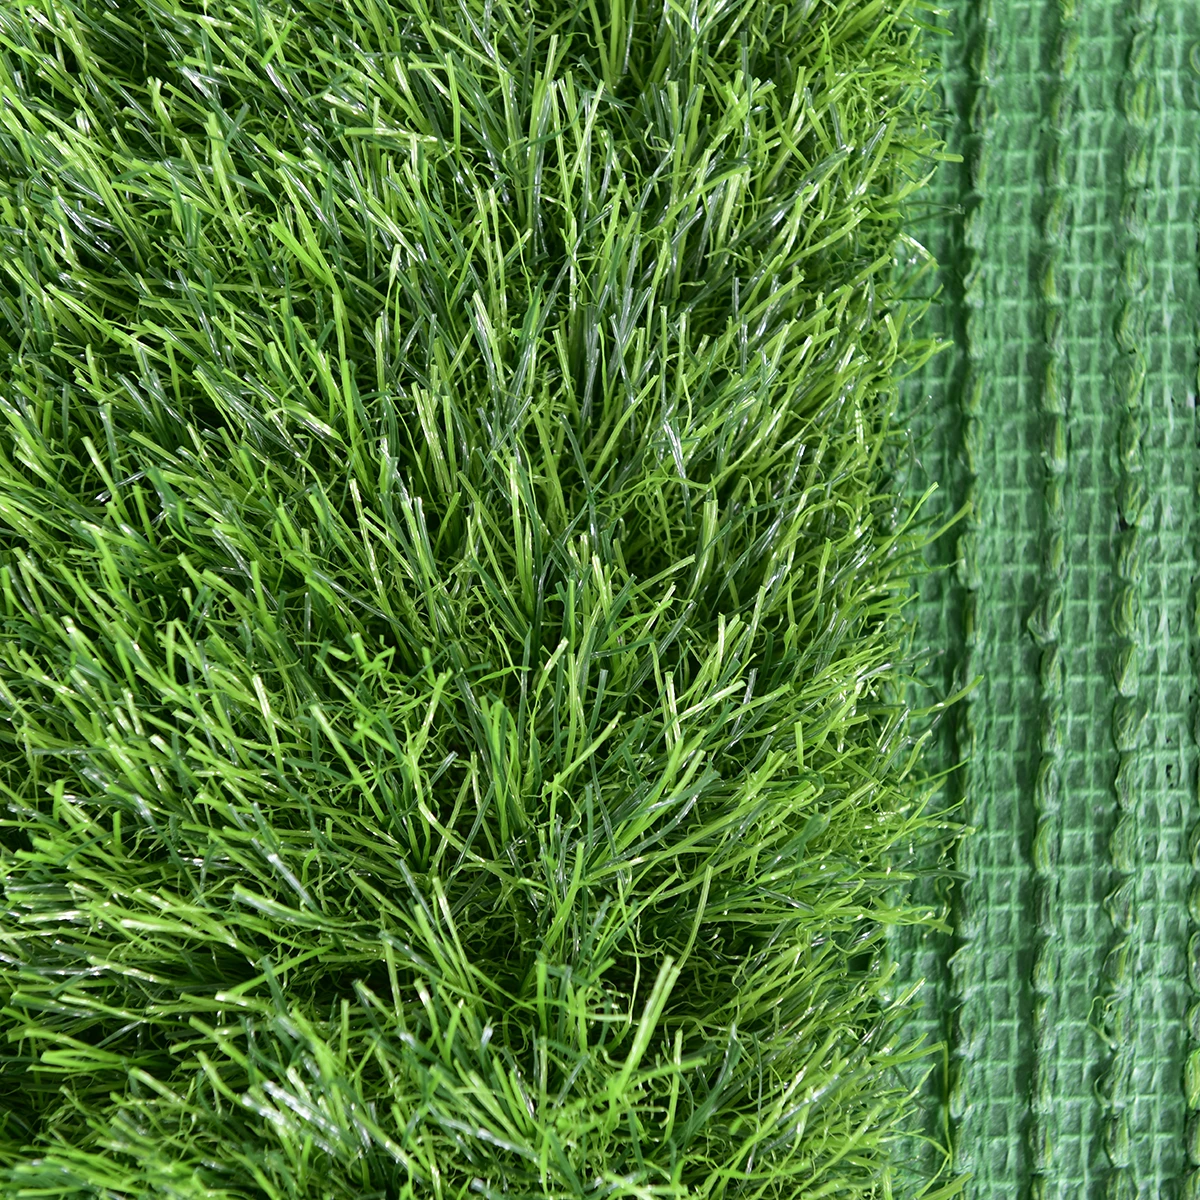 synthetic grass artificial turf high density putting turf power broom artificial turf